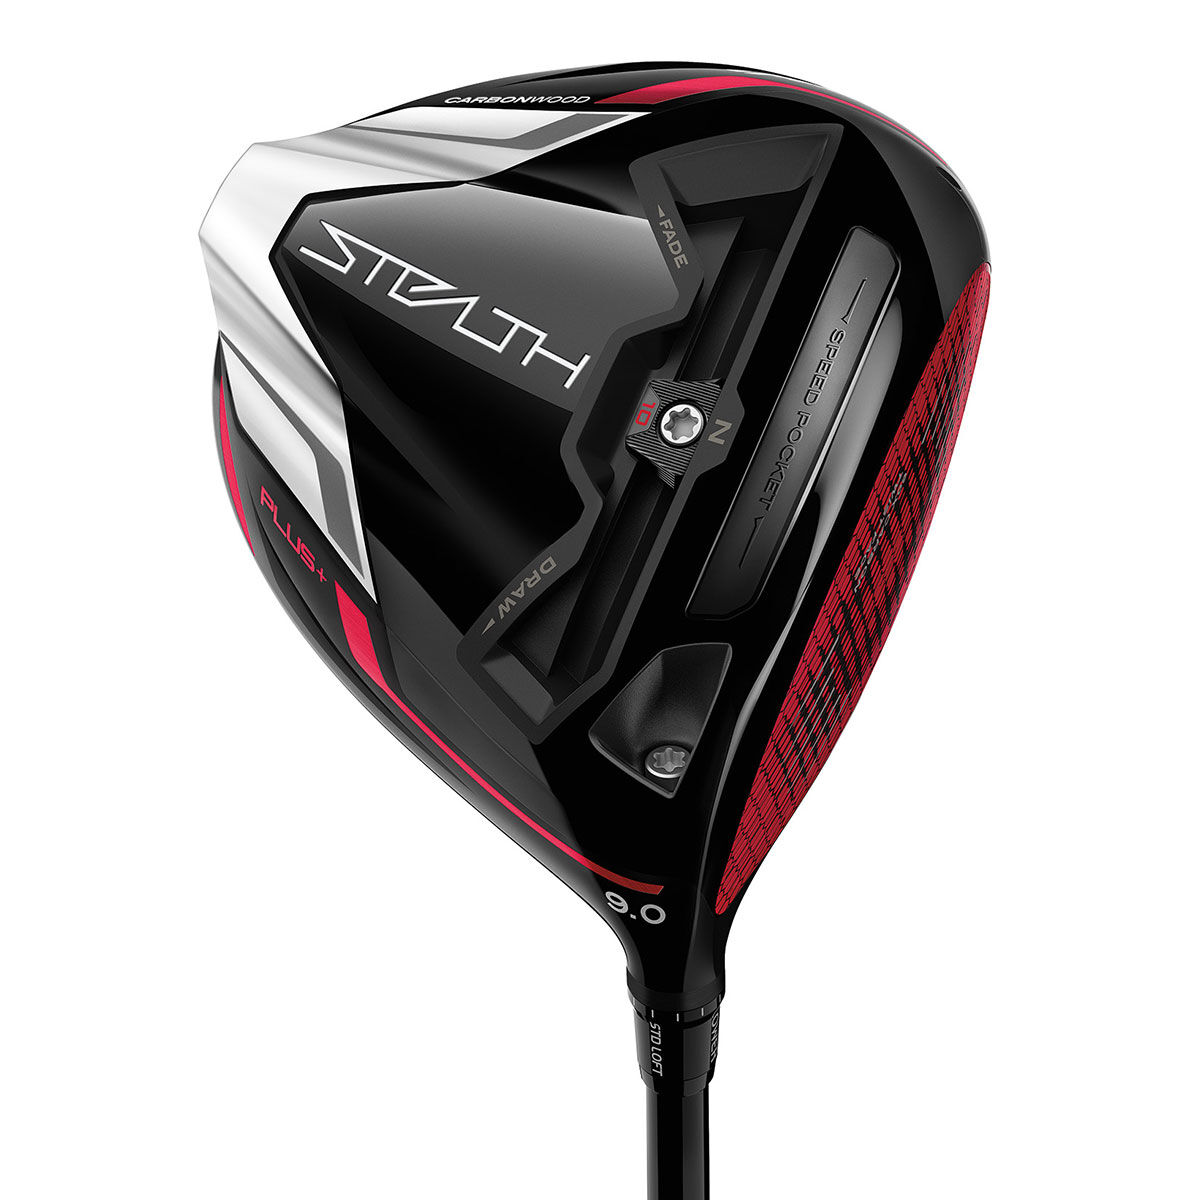 TaylorMade Mens Black and Red Stealth PLUS+ Project x hzrdus Stiff Left Hand Golf Driver, Loft: 10.5° | American Golf, 10.5 degree von TaylorMade